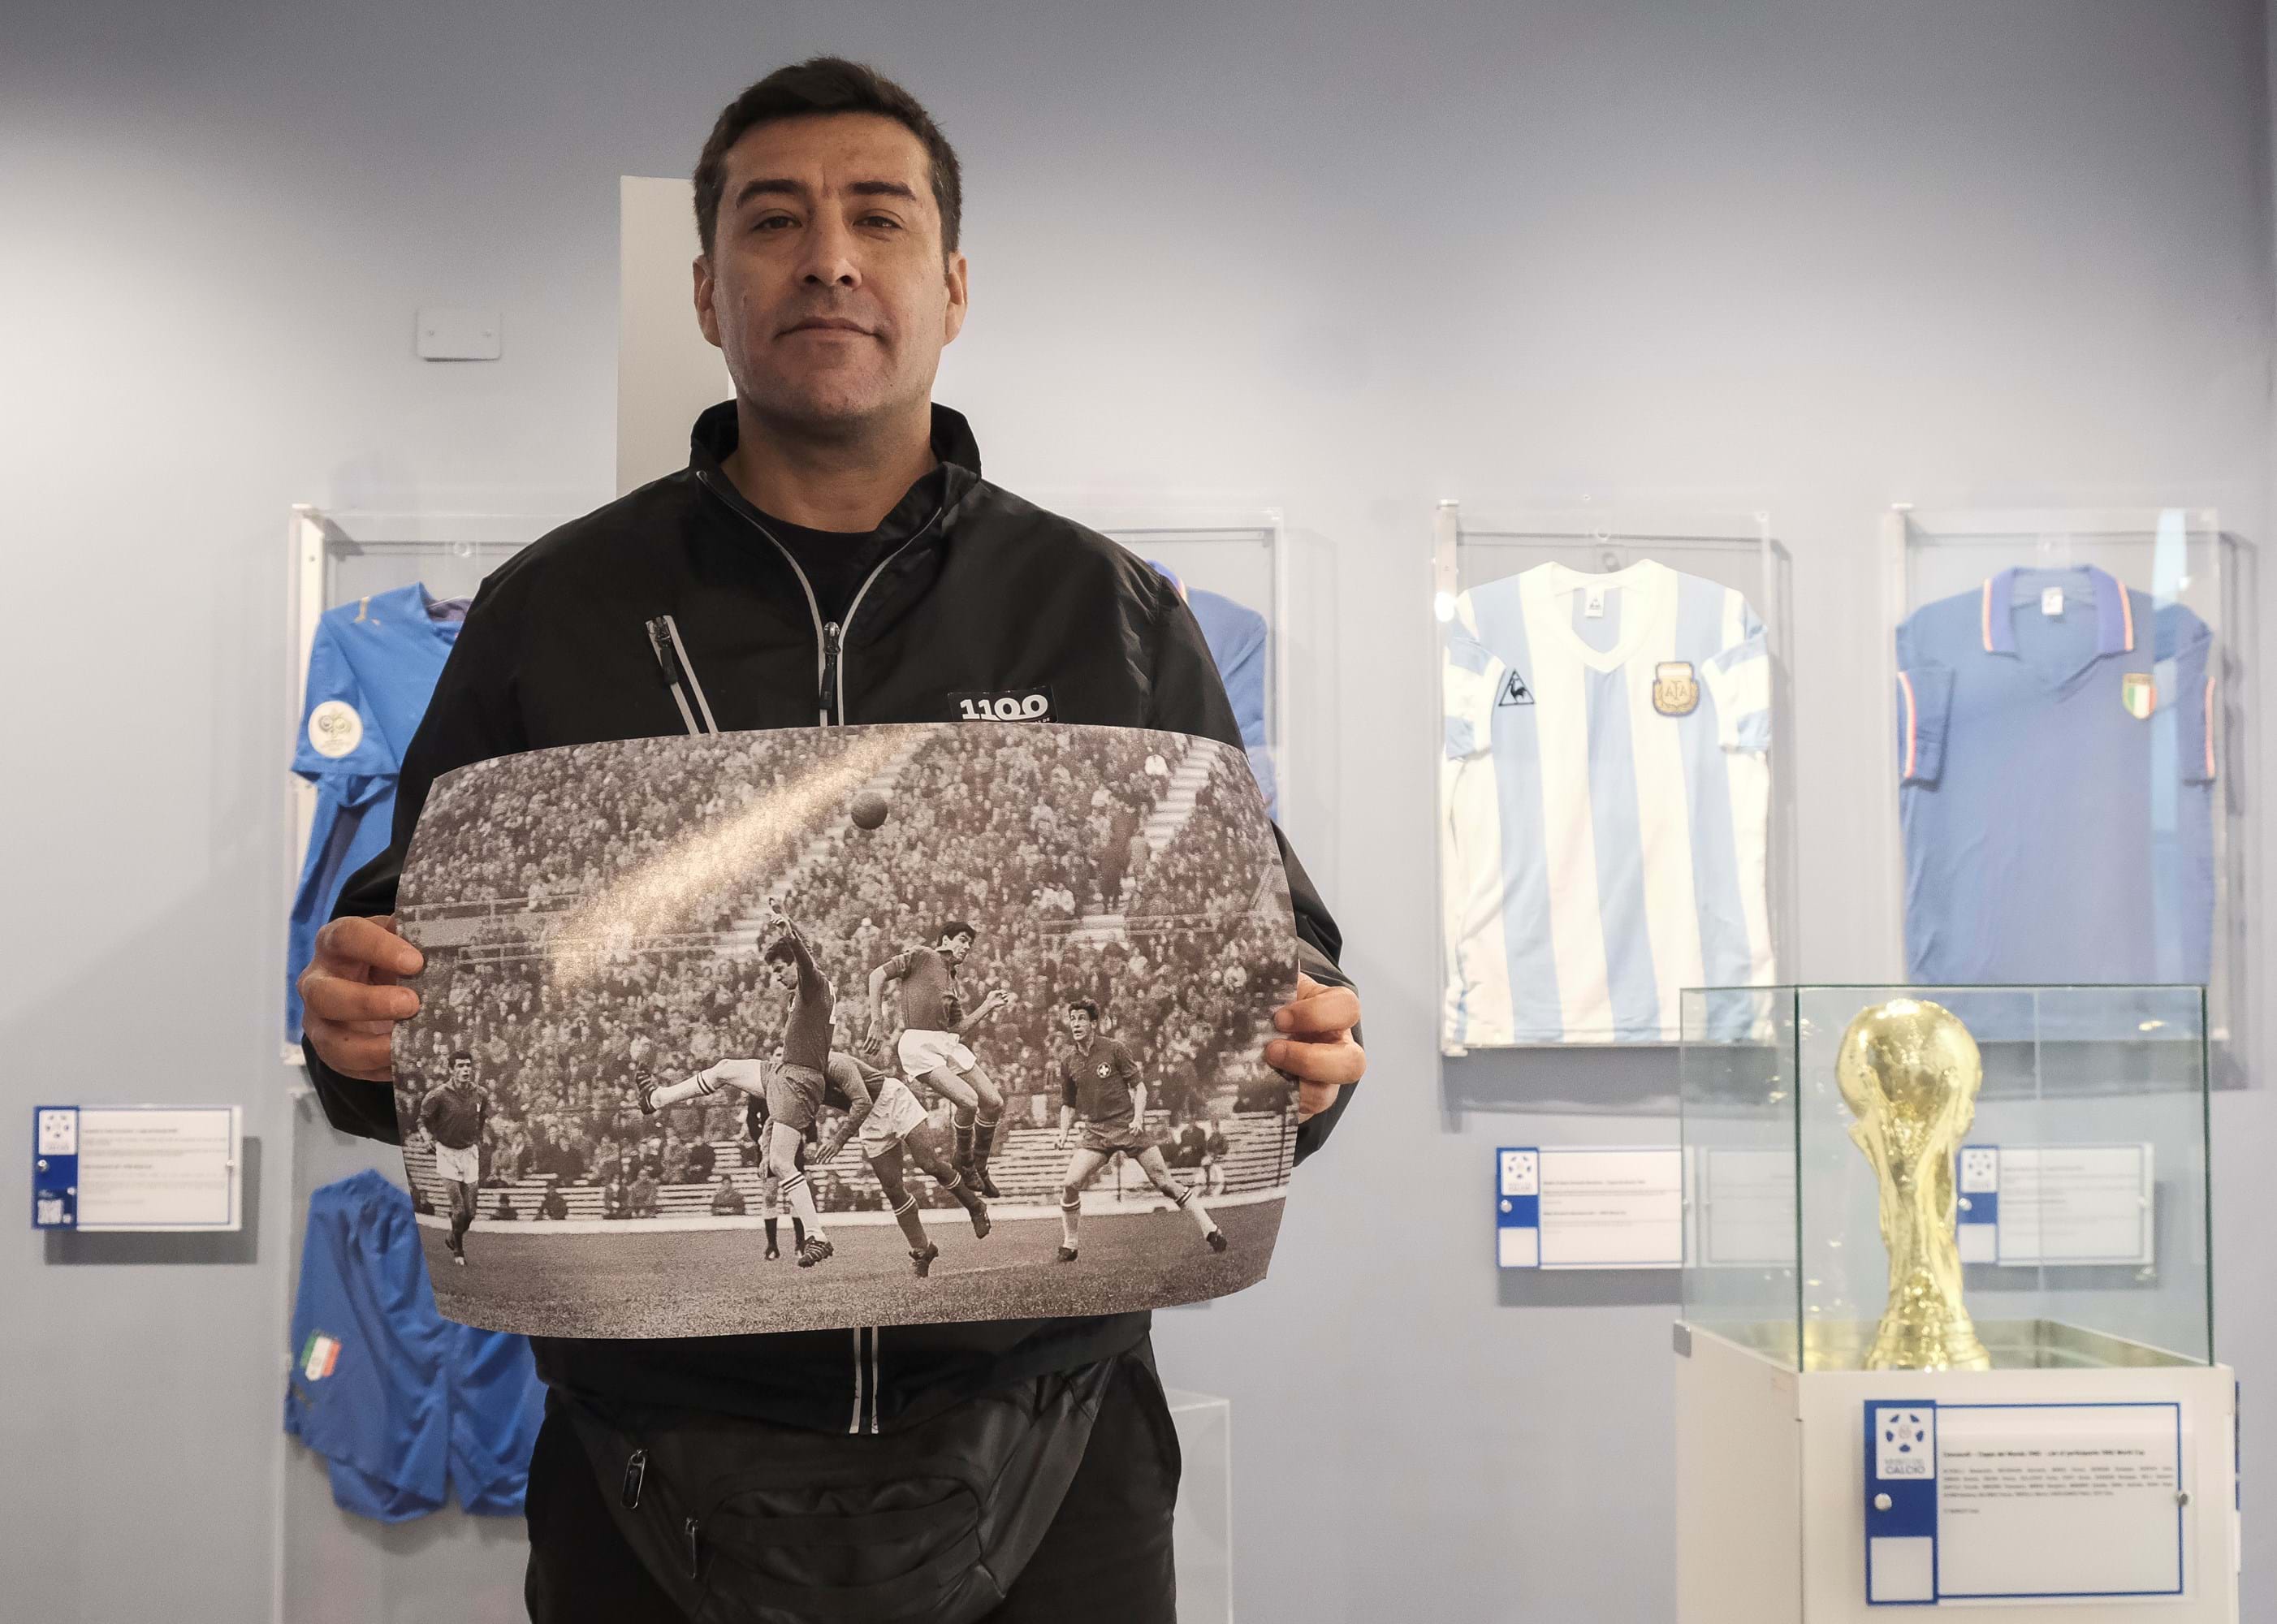 1962 World Cup and 'the battle of Santiago': photos donated to the Museo del Calcio